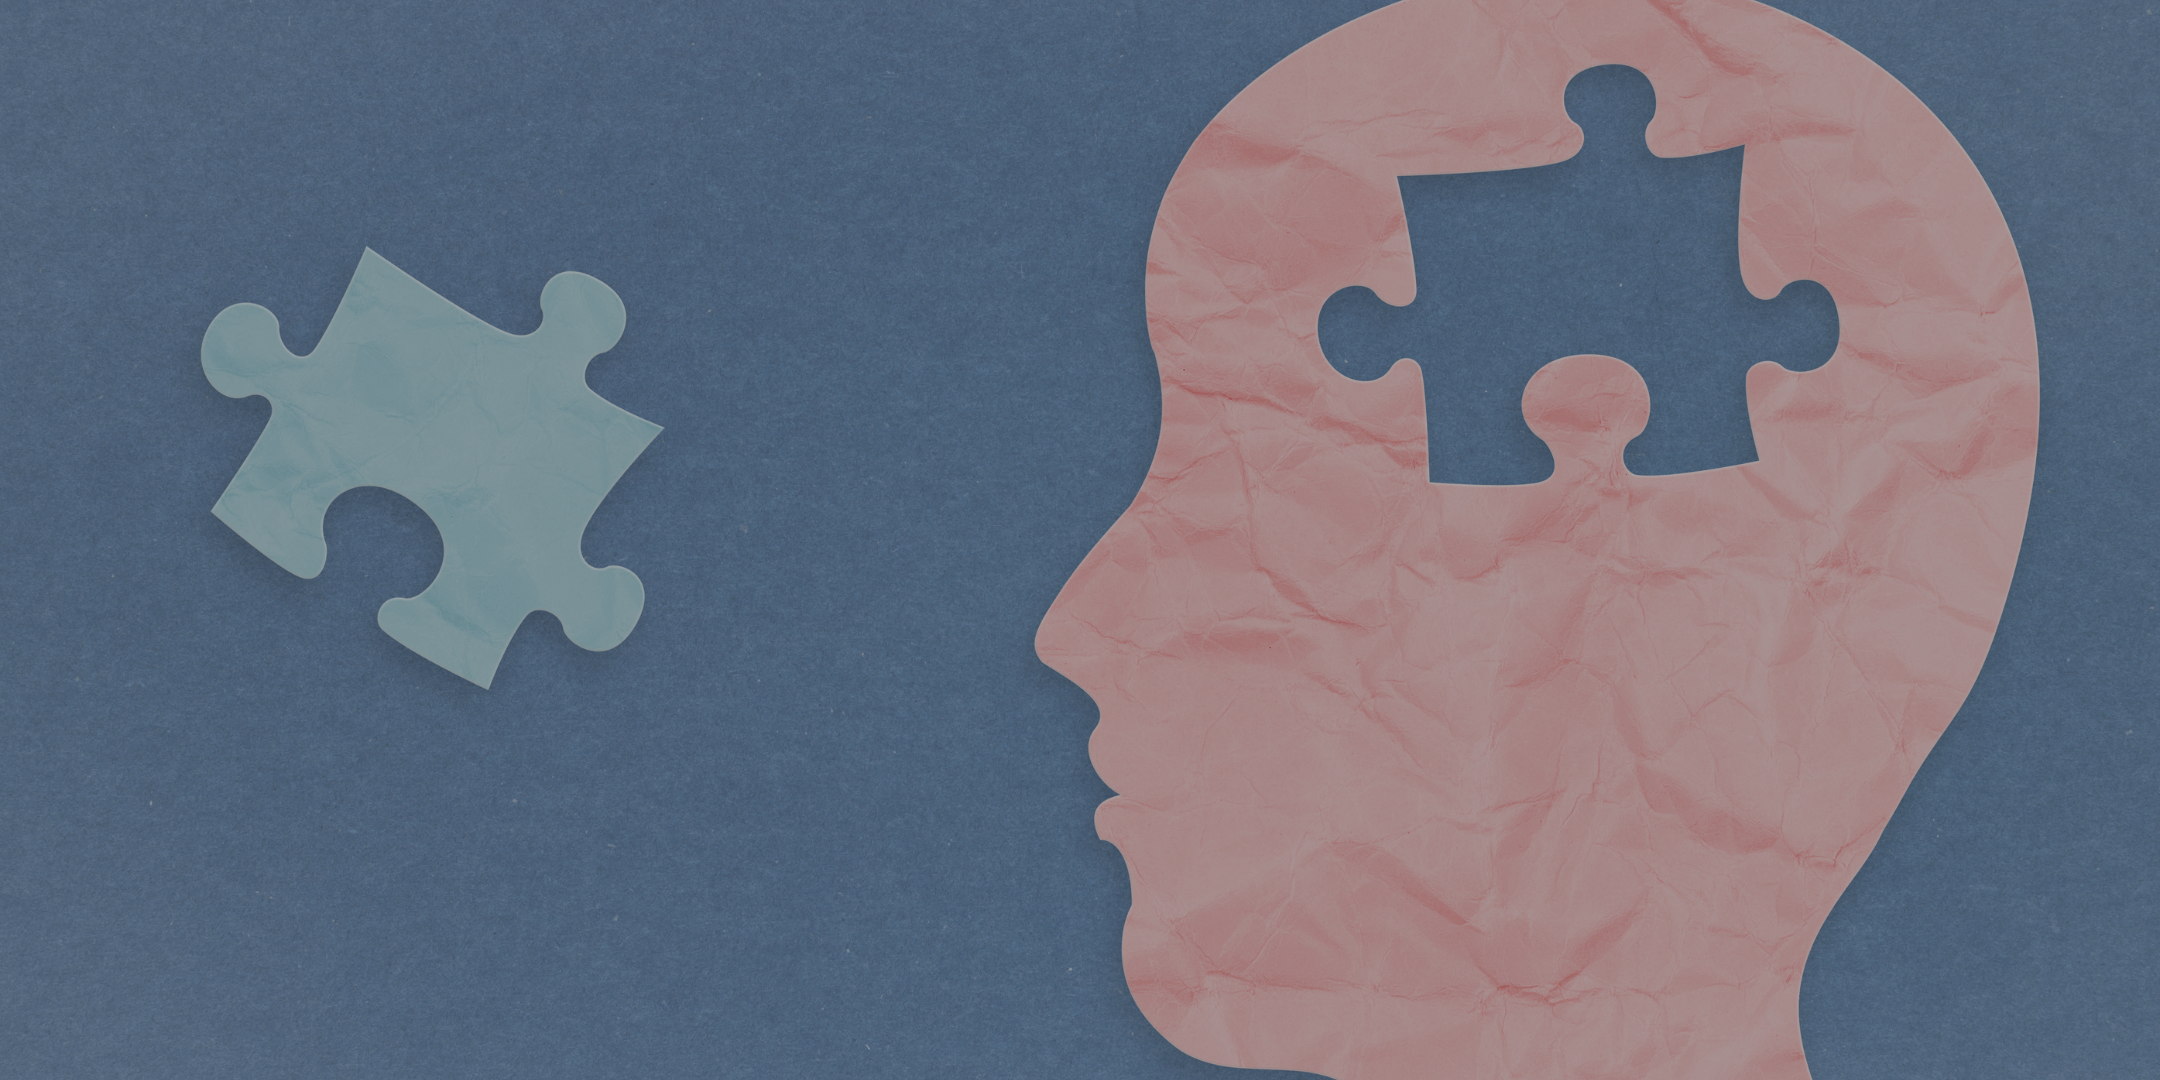 An illustration of a silhouette of a head with a puzzle piece missing, next to the fitting puzzle piece.